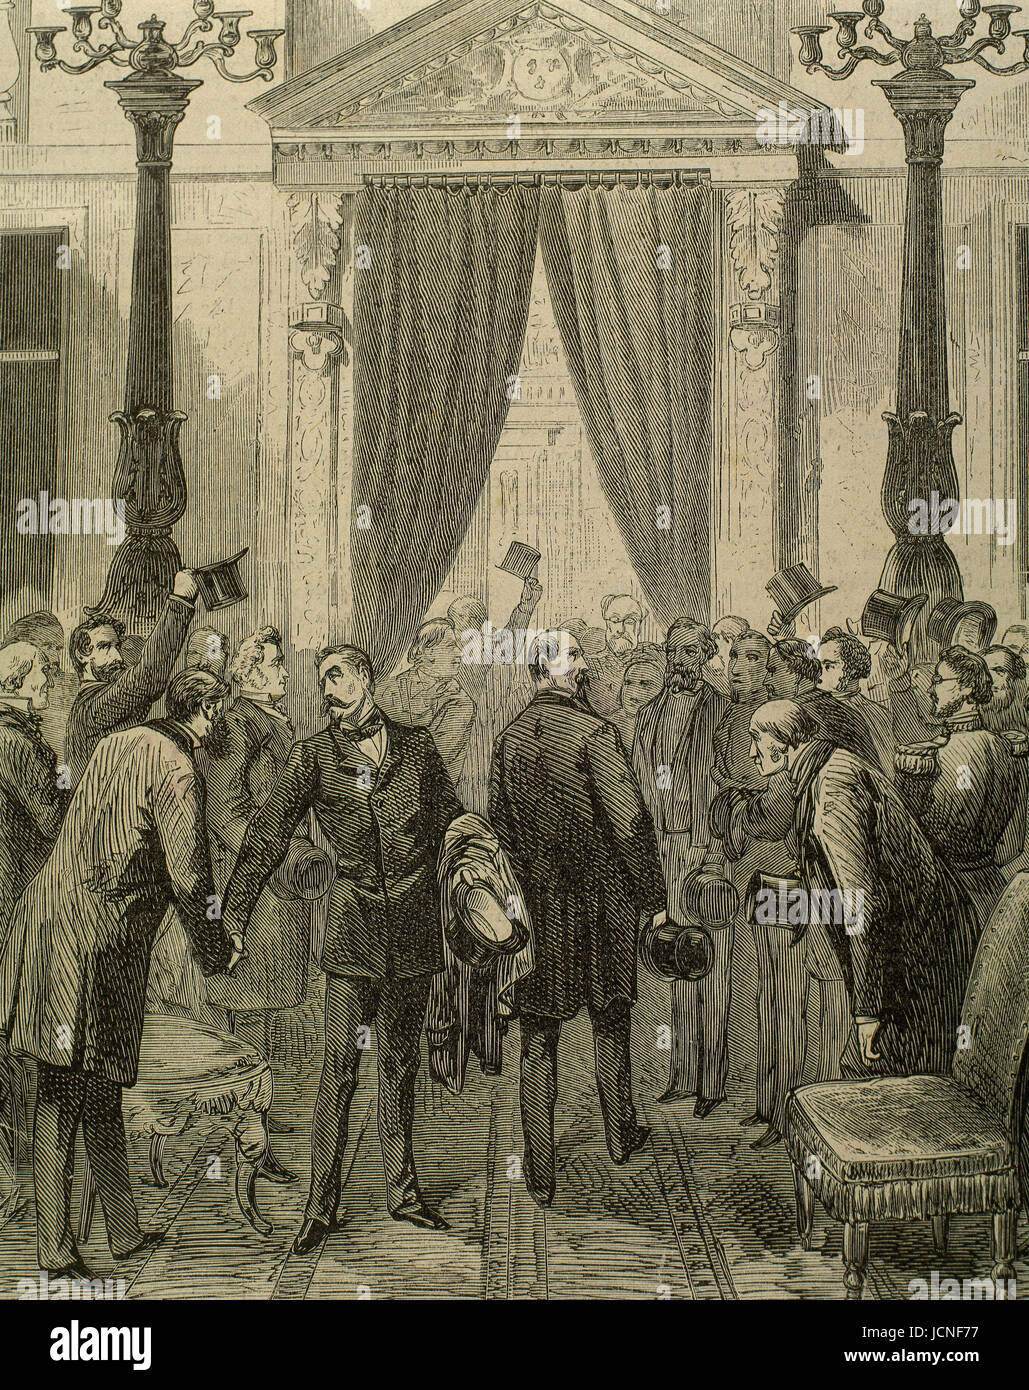 1851 Vintage Illustration Engraving The Duchess of Orleans at Chamber of Deputies 1848 French Revolution 8 3/4 x 5 1/2 Historical Interest